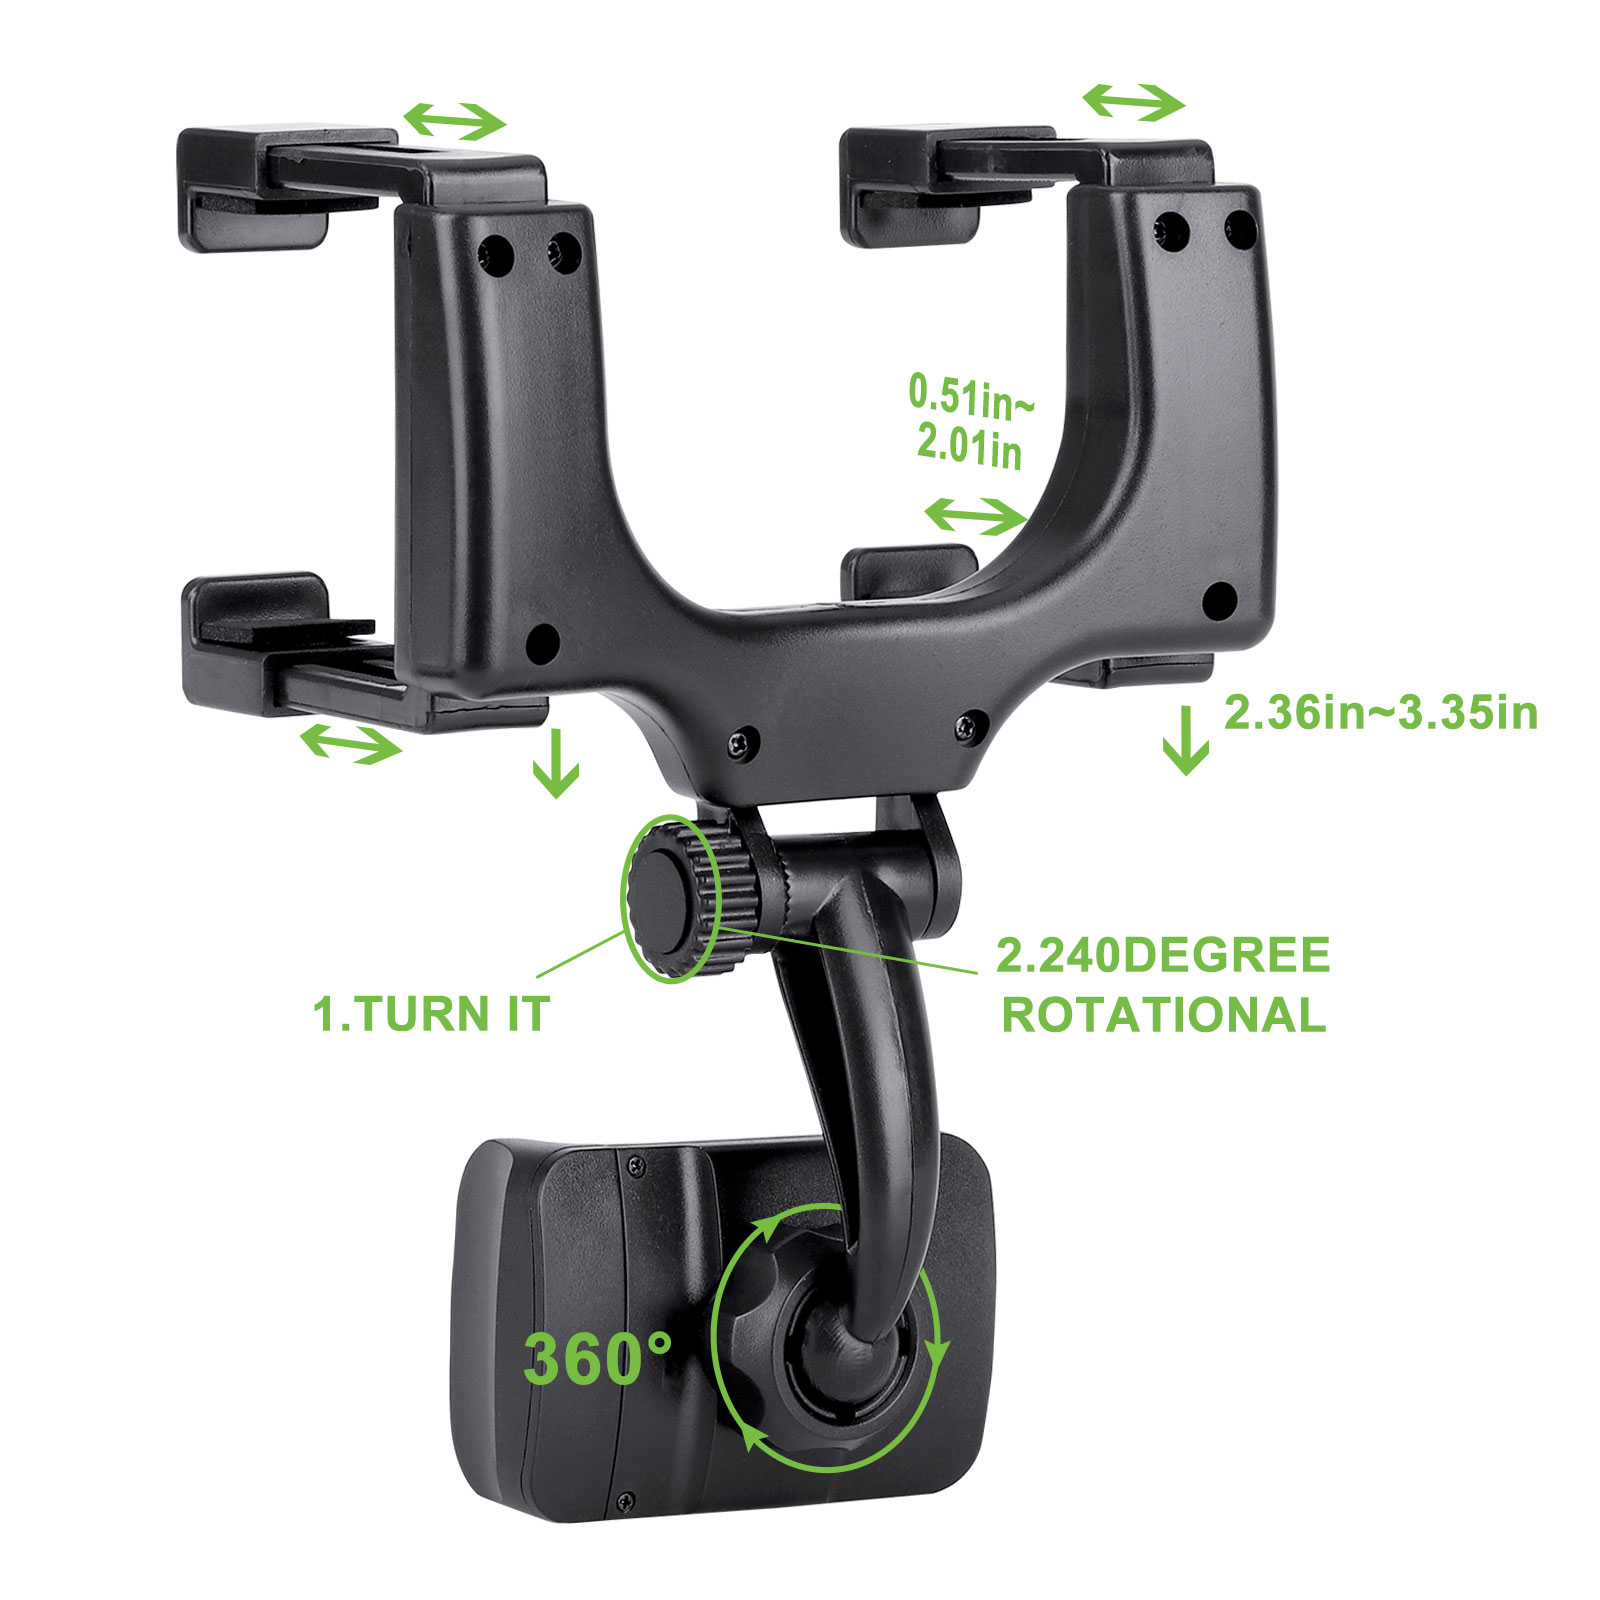 TSV Car Rear View Mirror Mount Grip Clip, 240 Rotation Car Mount Holder, Universal Smartphone Holders Cell Phone Mount Fit for iPhone 13/12/11 Pro Xr Xs Max X, Samsung S21/Galaxy, HTC, GPS, Smartphone - image 4 of 9